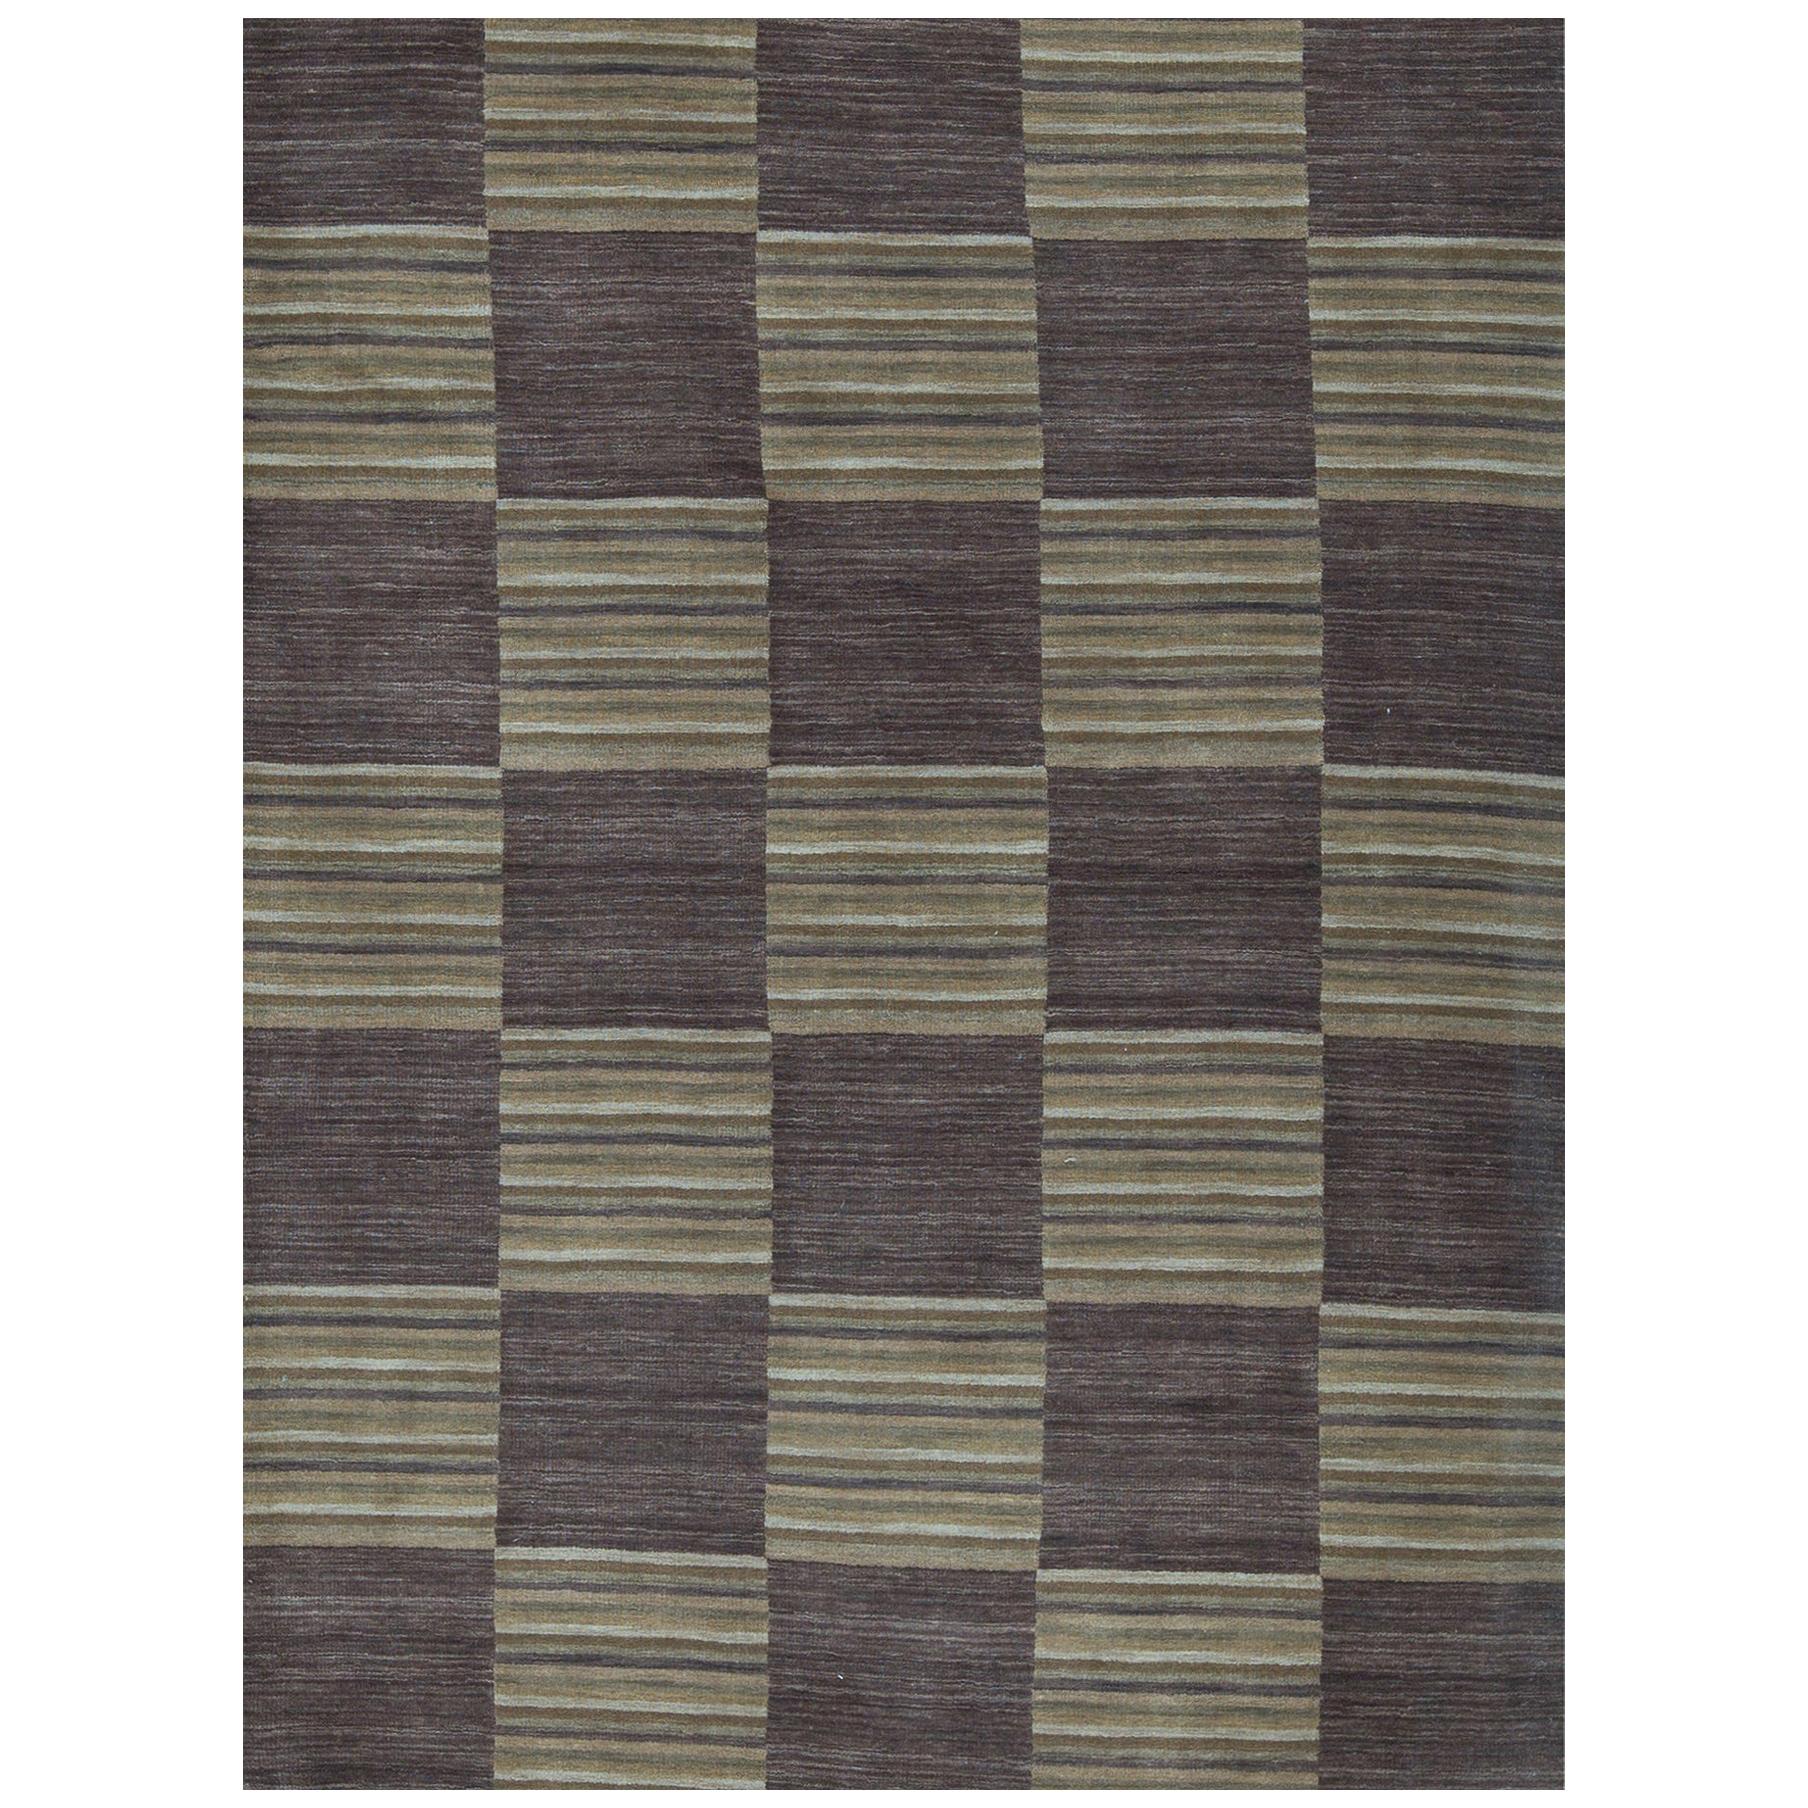 One-of-a-Kind Contemporary Handwoven Wool Area Rug 5'2” x 7'2". For Sale